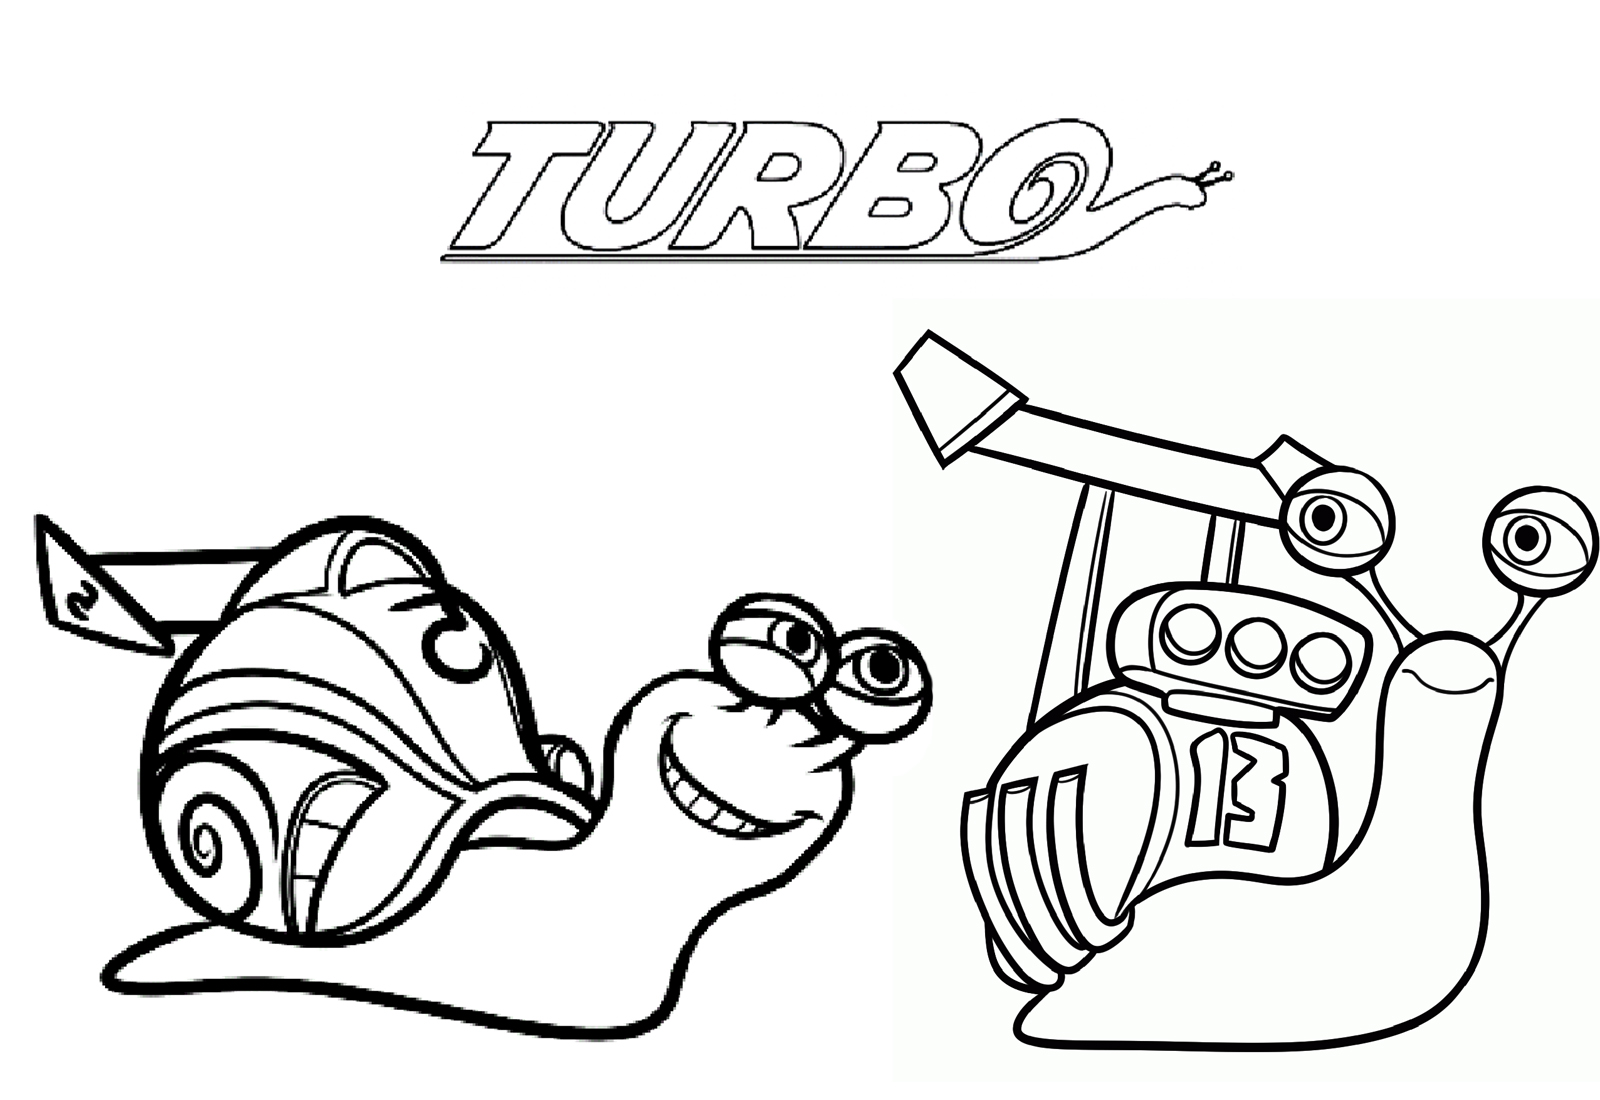 Turbo coloring pages with 2 of the heroes of this Dreamworks movie